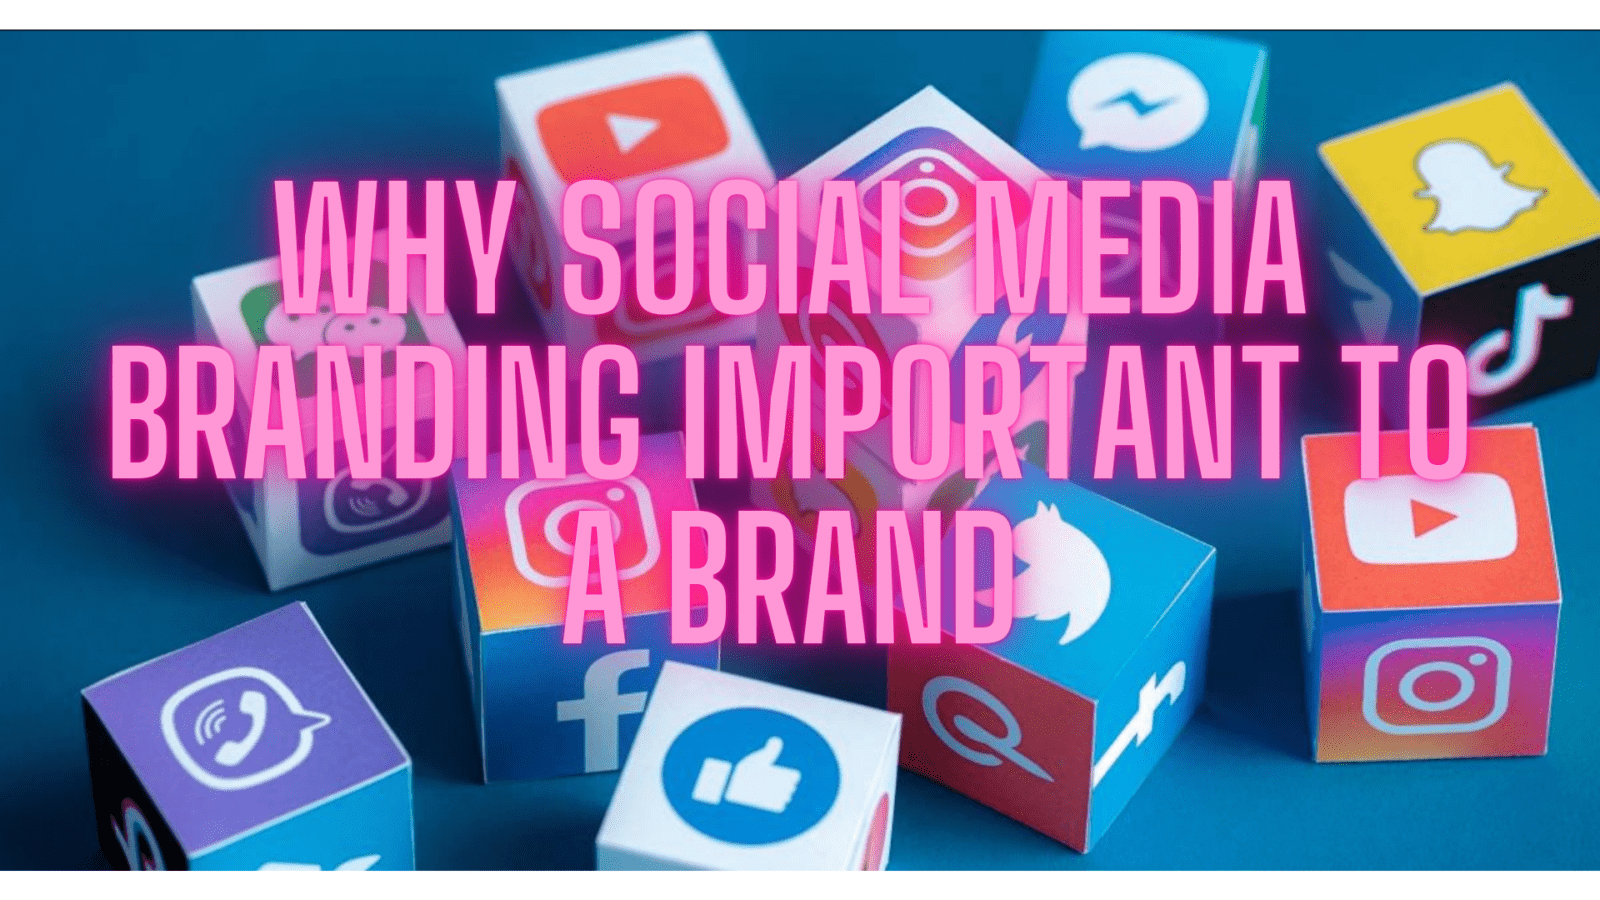 Why social media branding important to a brand